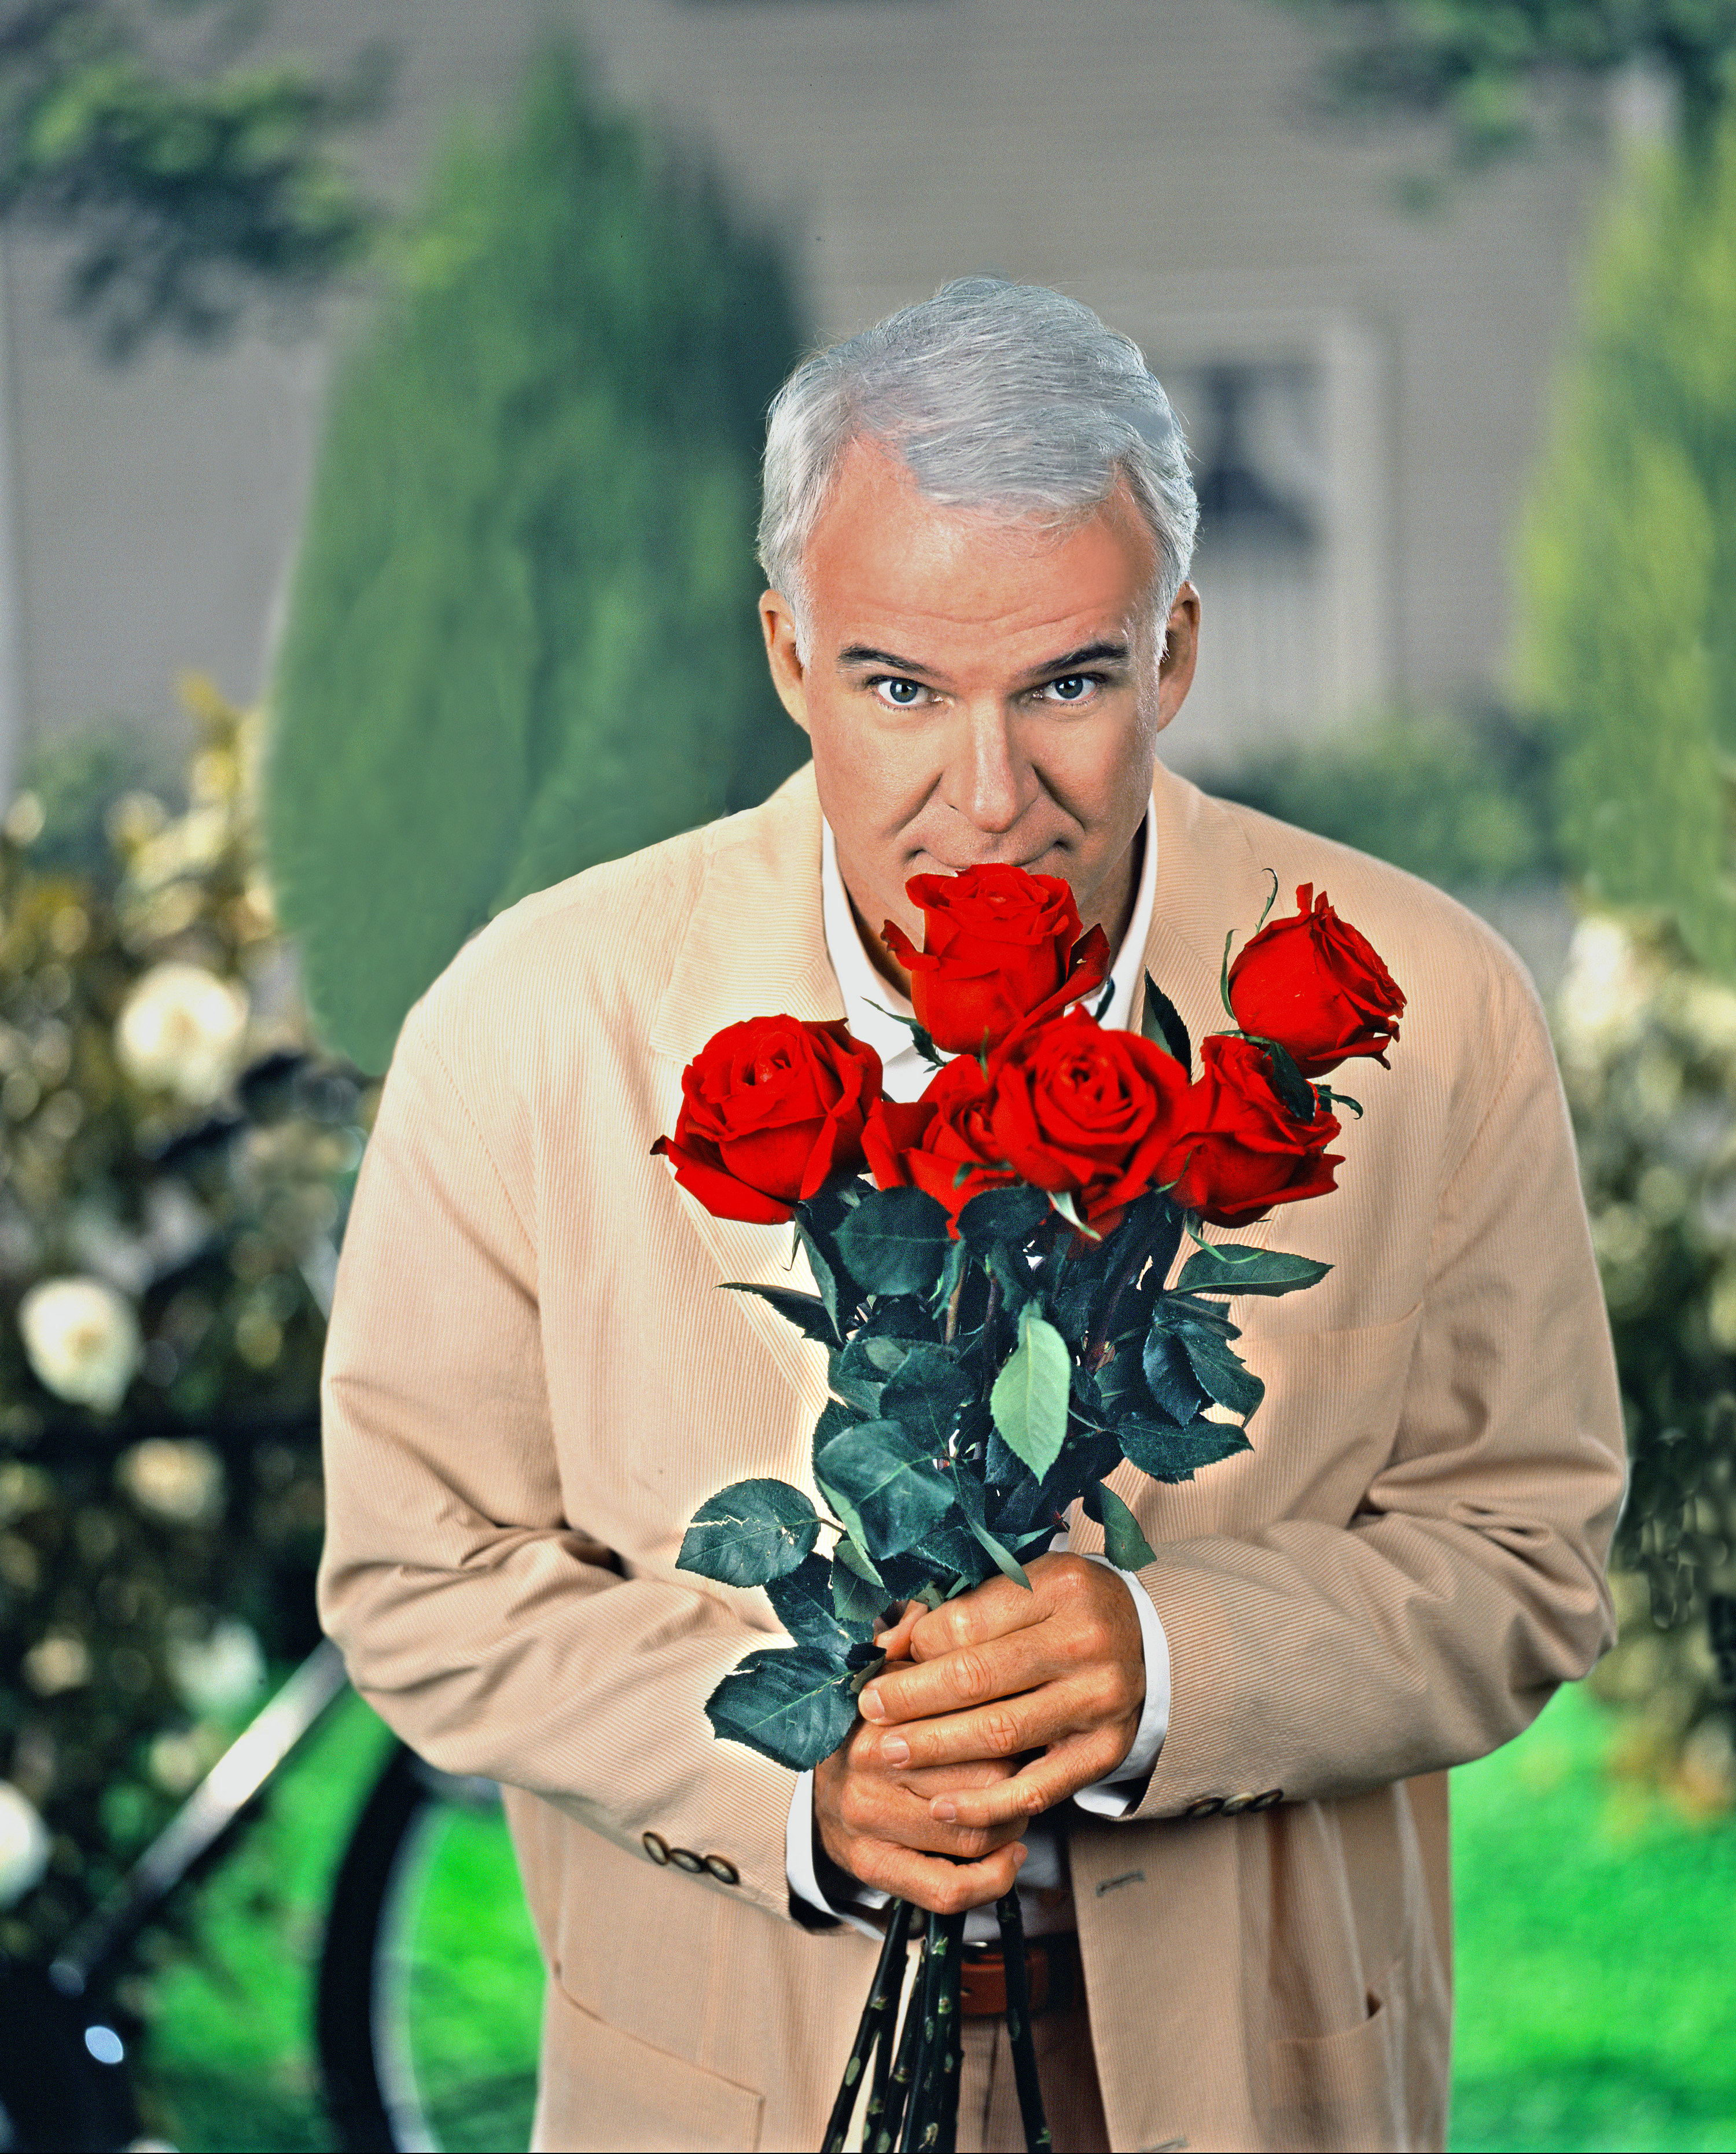 Steve Martin holds a bouquet of roses in a garden